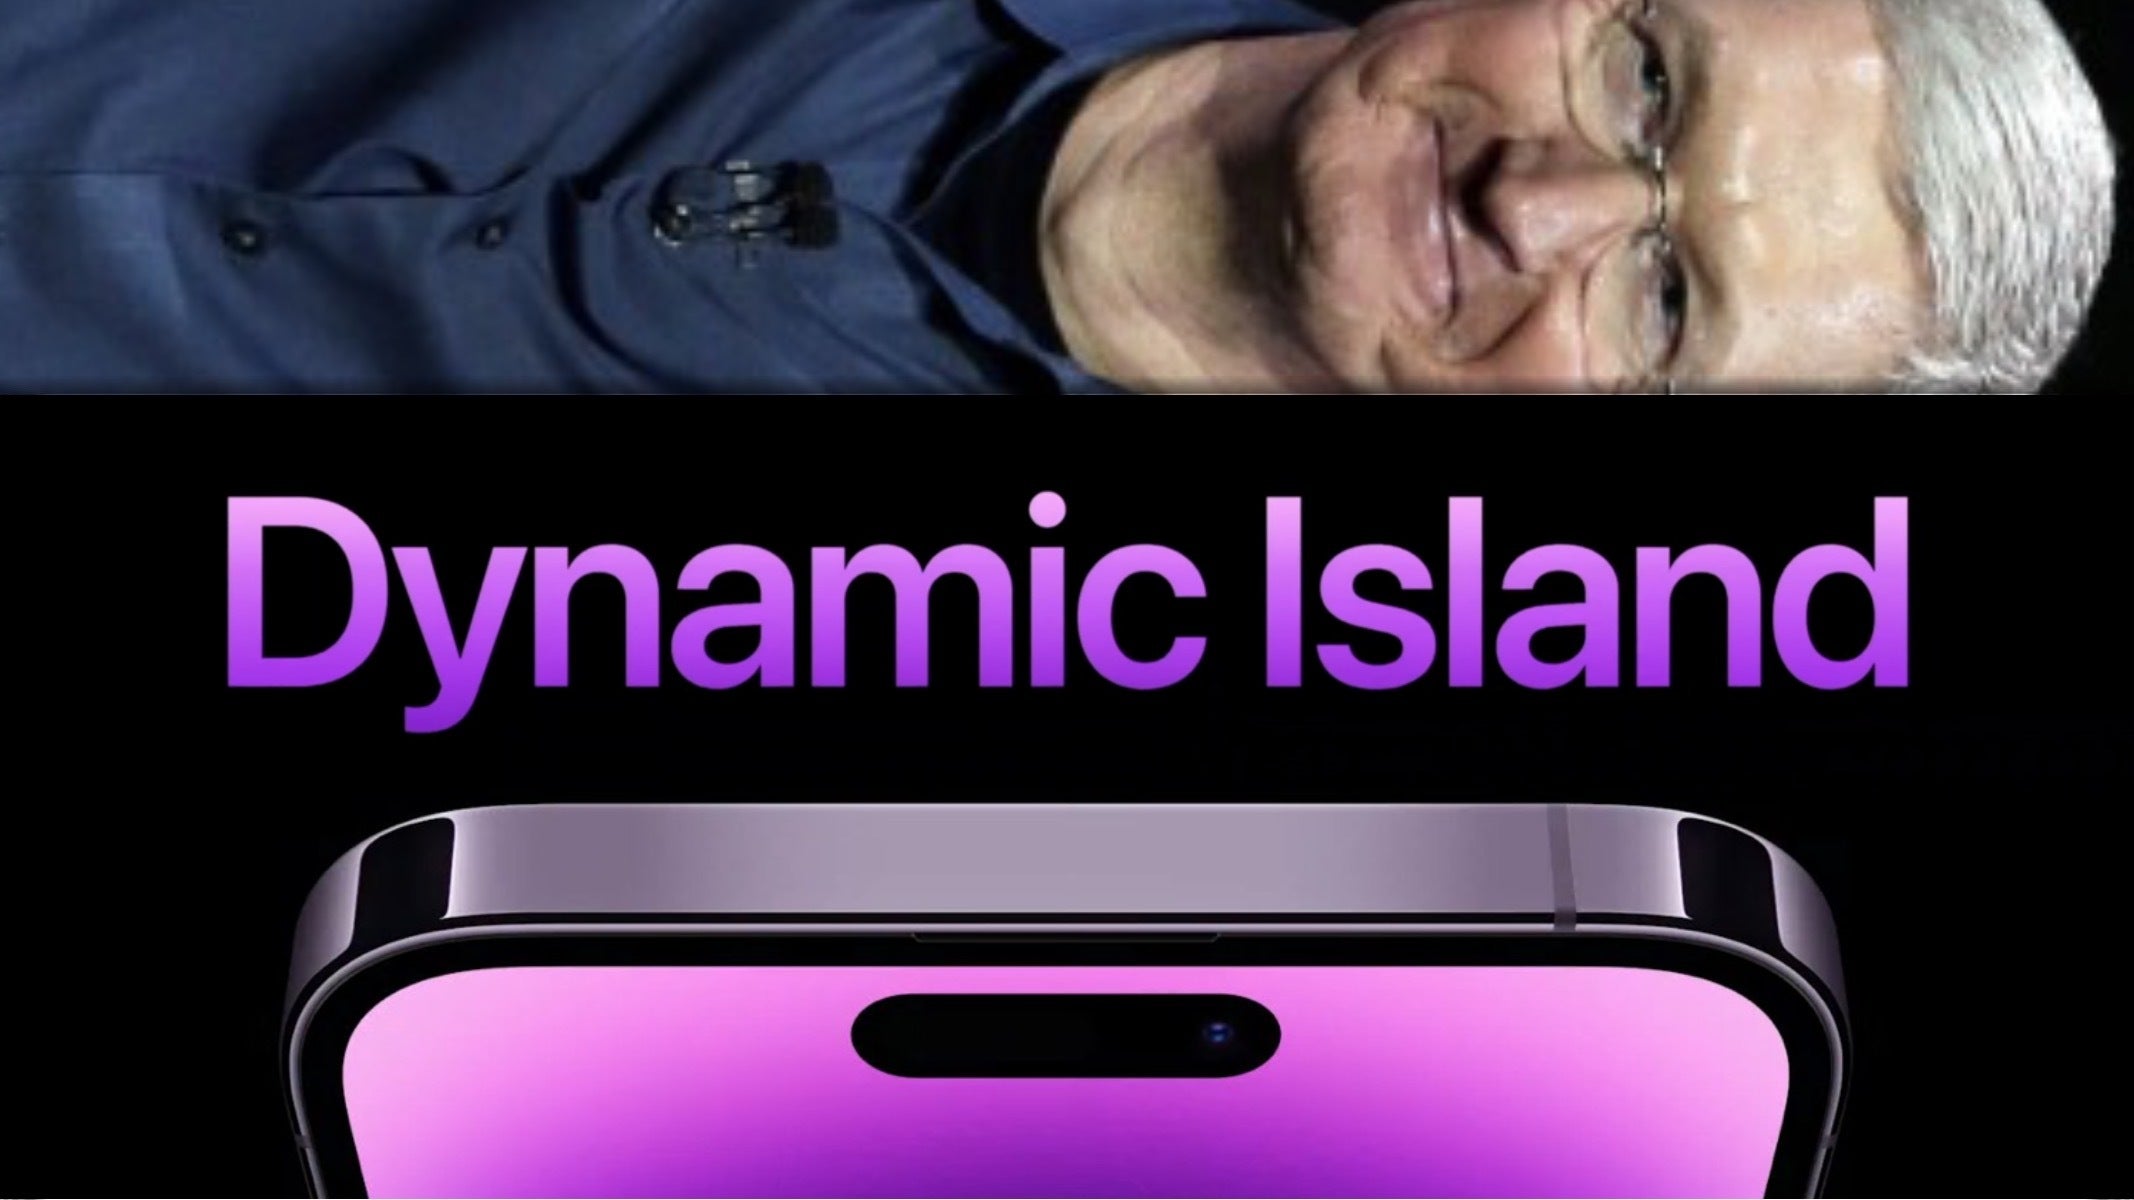 Try smart. Not hard. - iPhone 14 Pro Dynamic Island: Brainwashing? Apple did what Samsung and Google couldn't do!